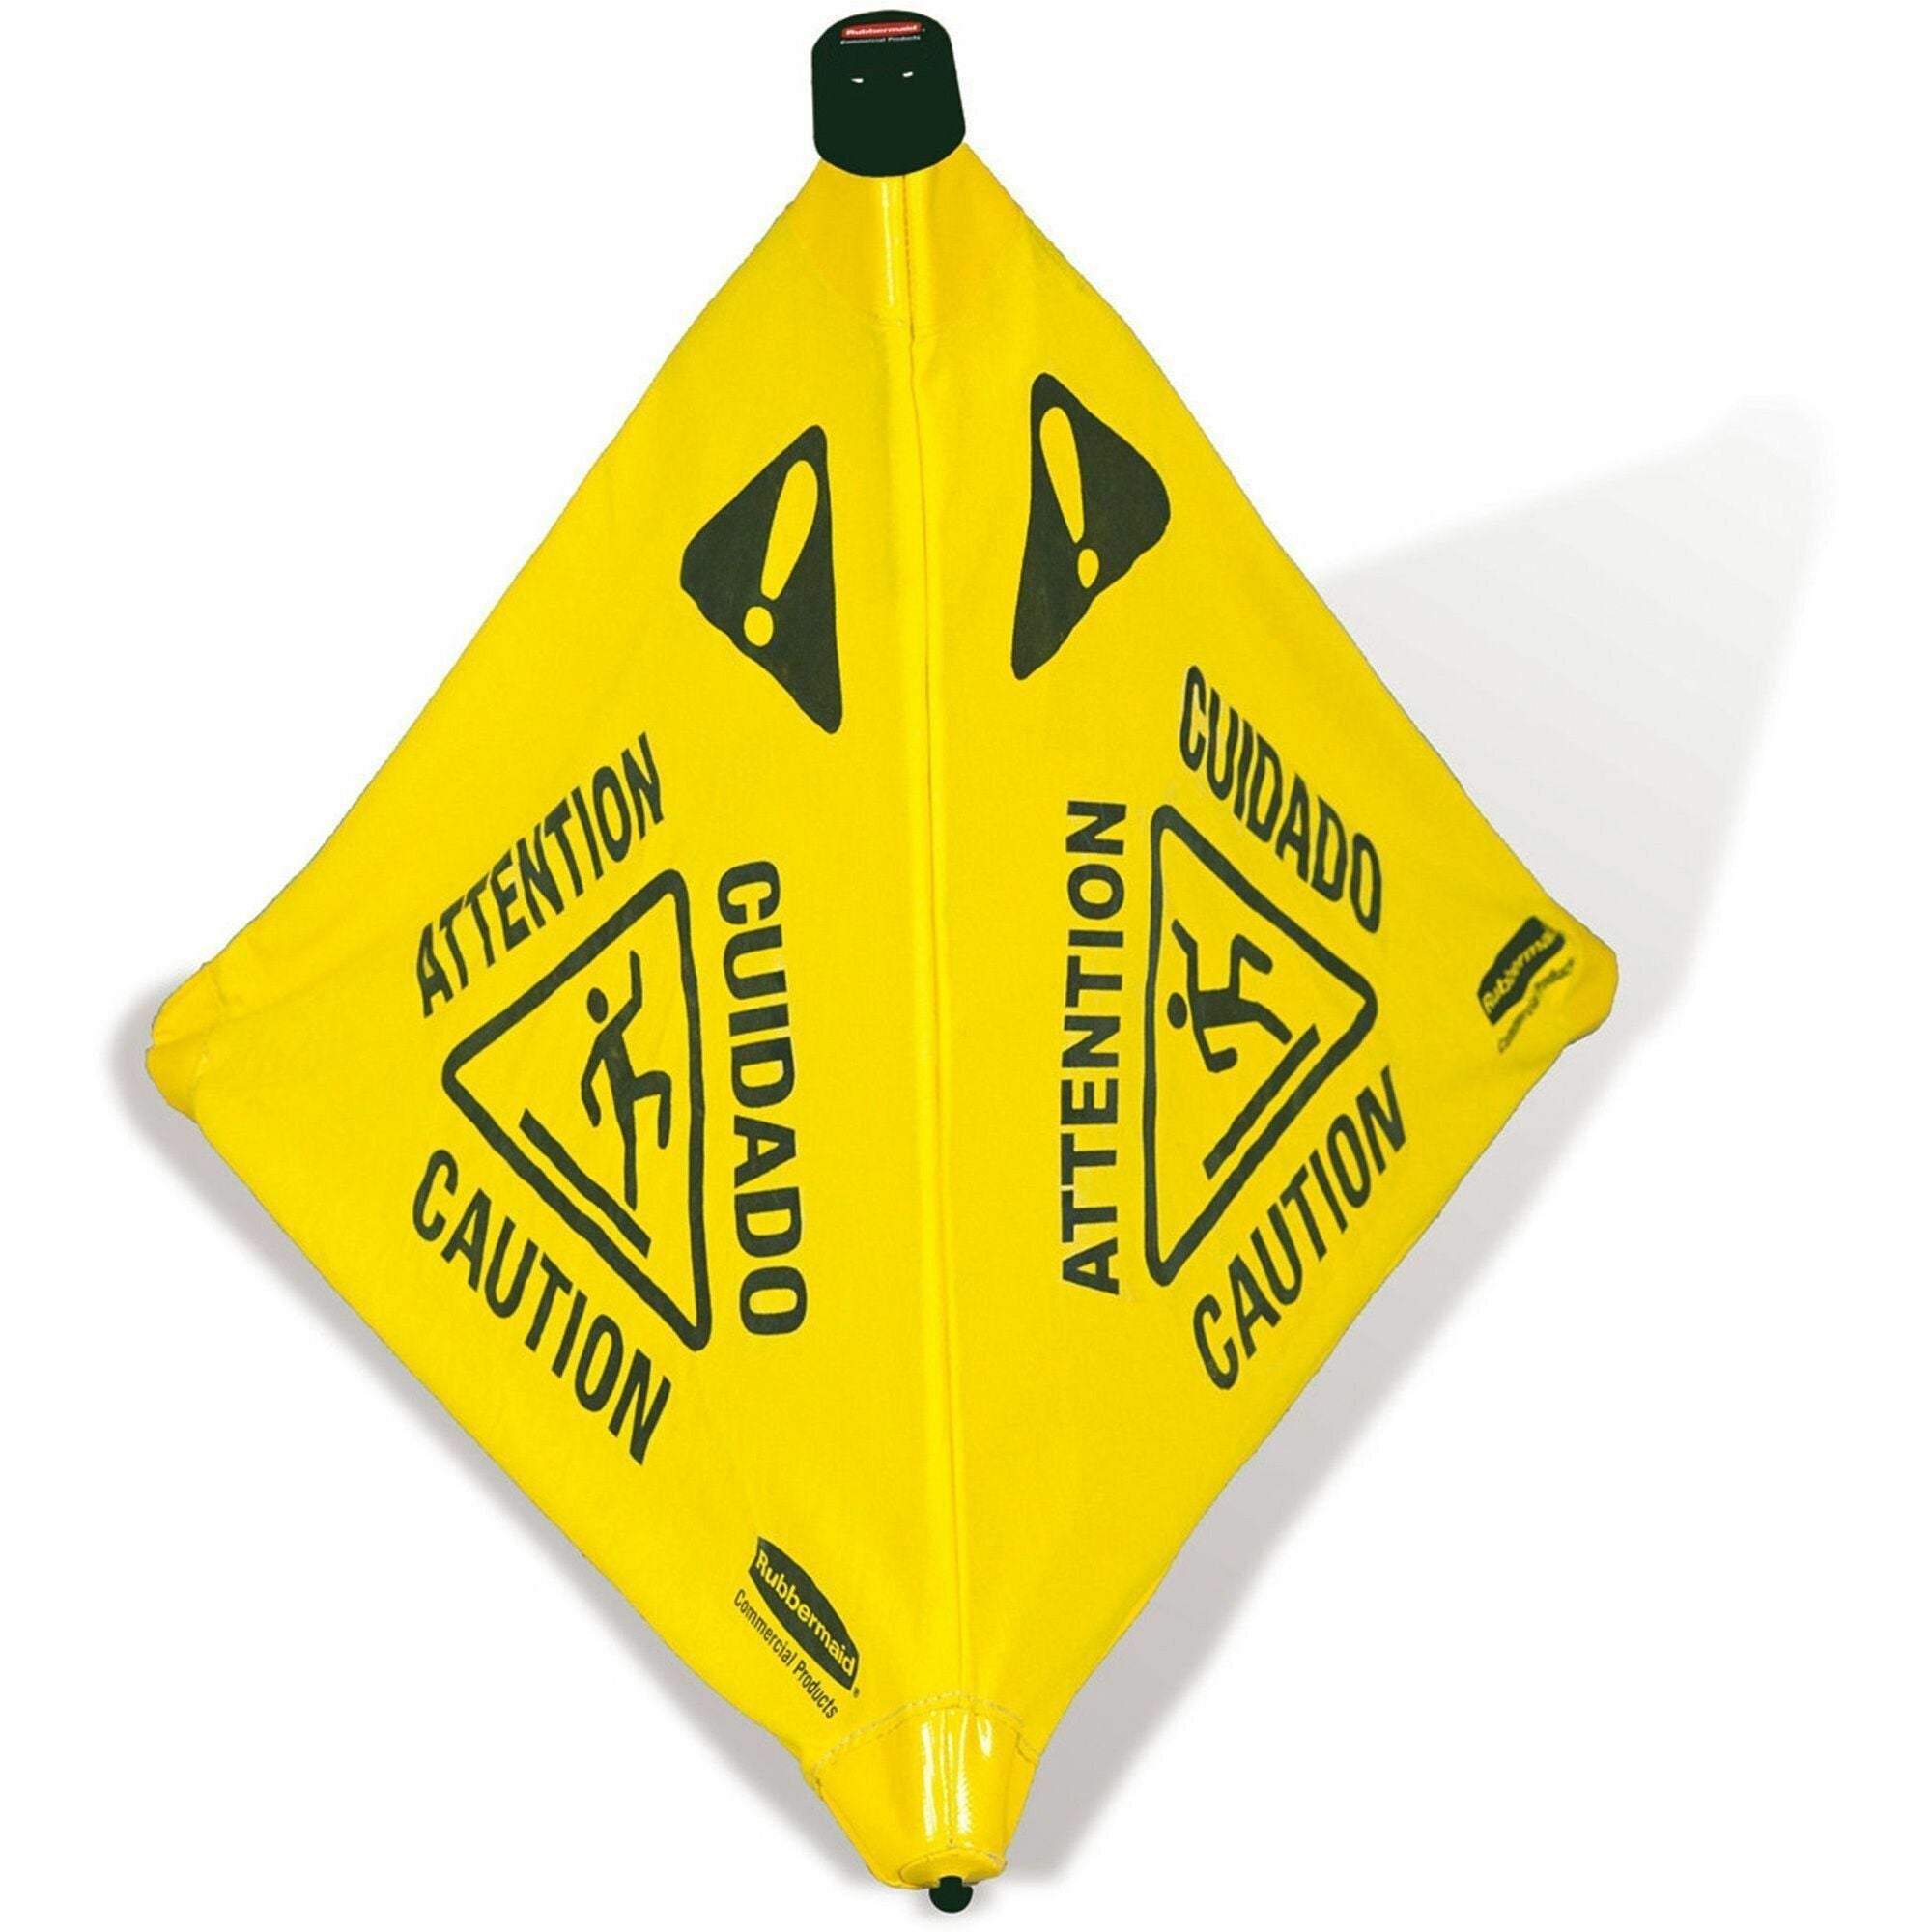 rubbermaid-commercial-30-pop-up-caution-safety-cone-12-carton-caution-attention-cuidado-print-message-21-width-x-30-height-wall-mountable-durable-multilingual-three-sided-foldable-yellow_rcp9s0100ylct - 1